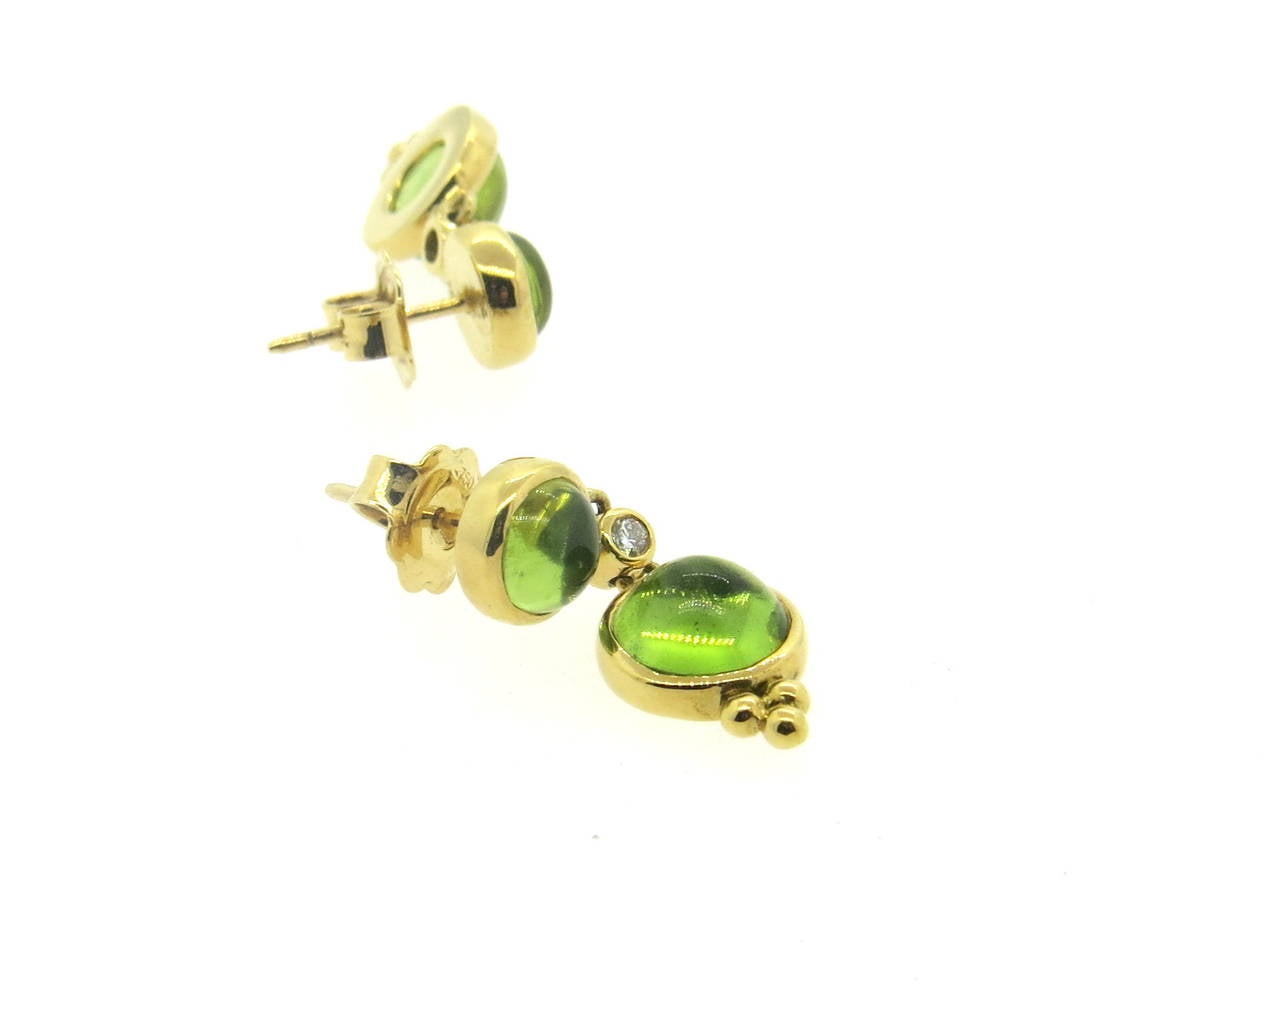 A pair of new 18k yellow gold drop earrings, crafted by Temple St. Clair, set with peridot cabochons and 0.06ctw in G/VS diamonds. Earrings are 26mm x 10mm. Marked with Temple hallmark and 750. Weight - 6.3 grams
Retail for $2750